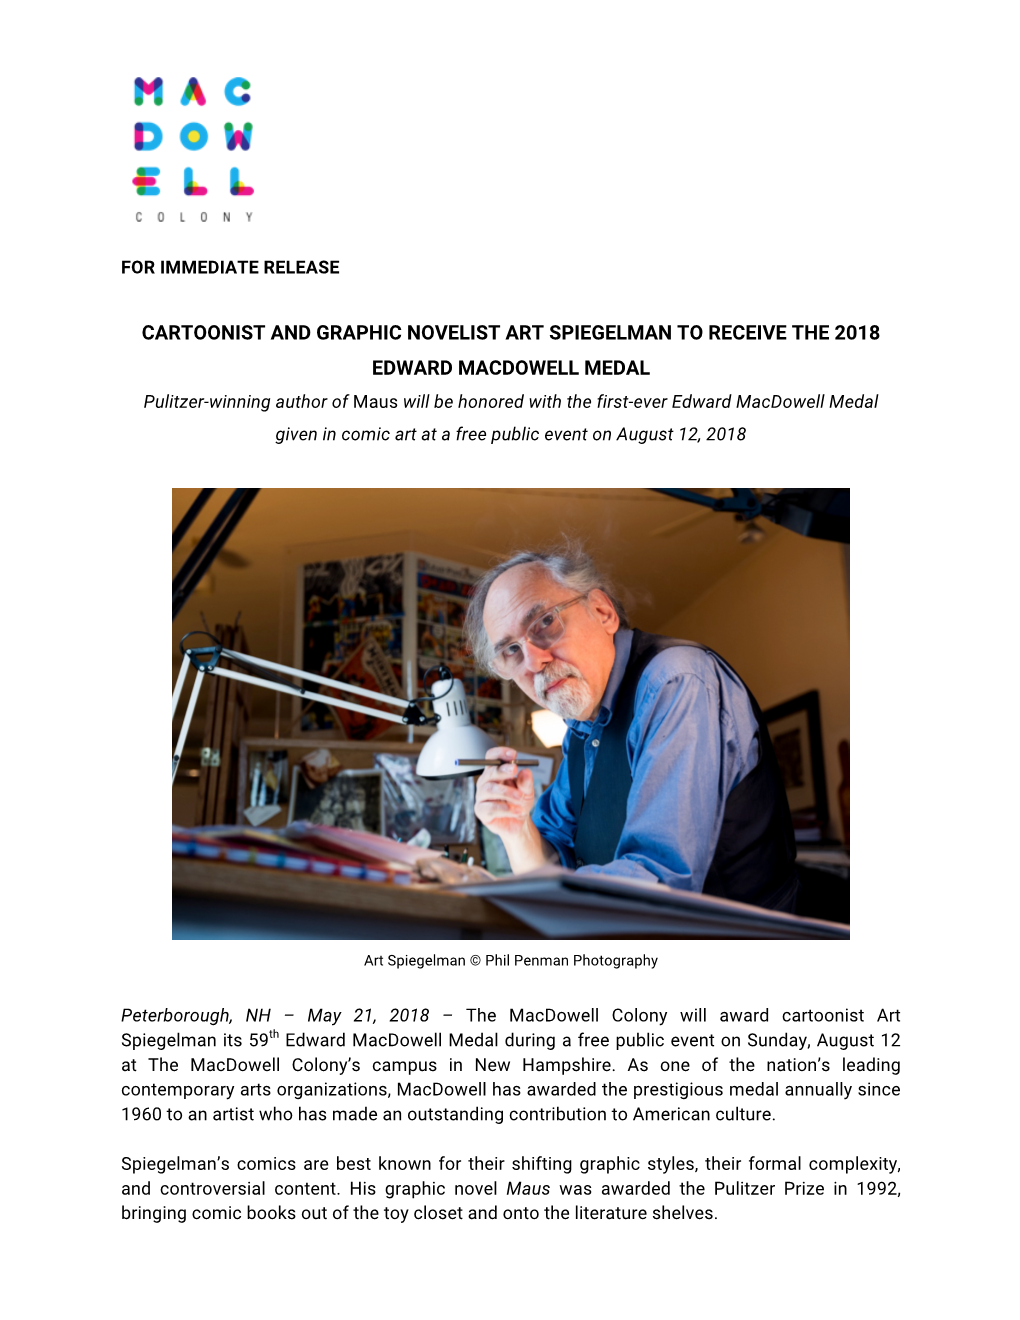 Cartoonist and Graphic Novelist Art Spiegelman to Receive the 2018 Edward Macdowell Medal